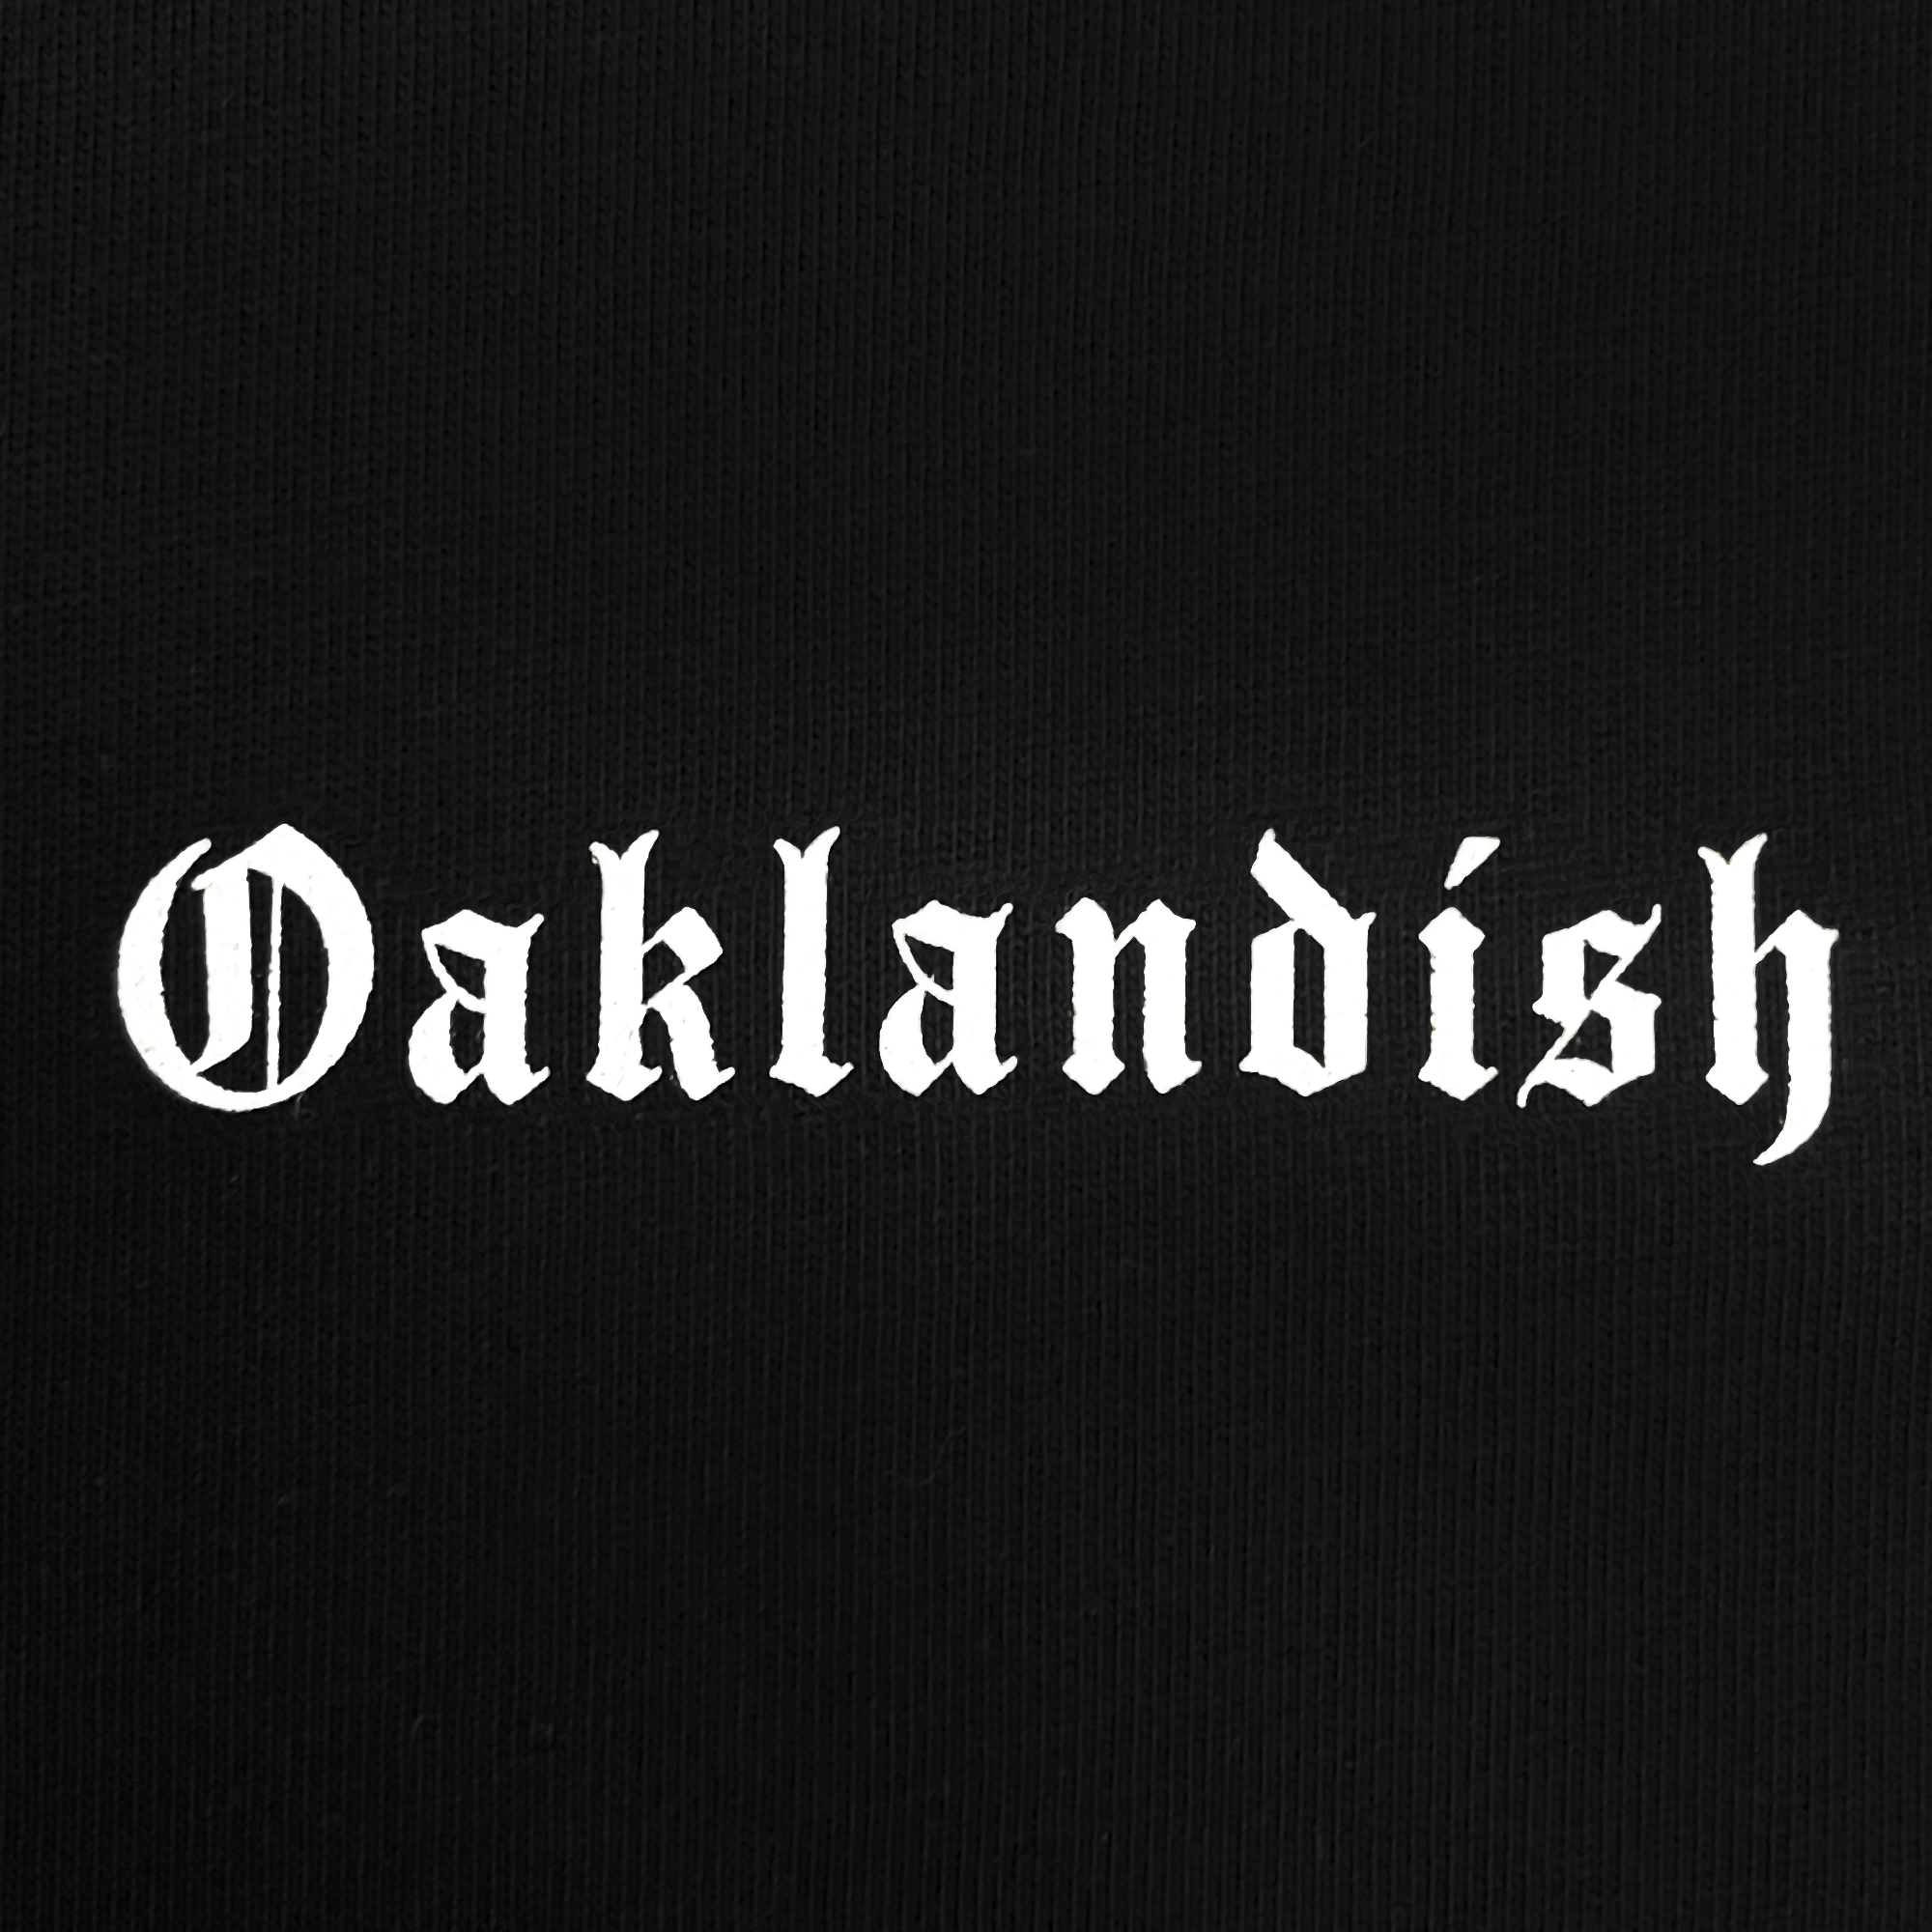 Detailed close-up of white OAKLANDISH wordmark in trip on a black baseball jersey.